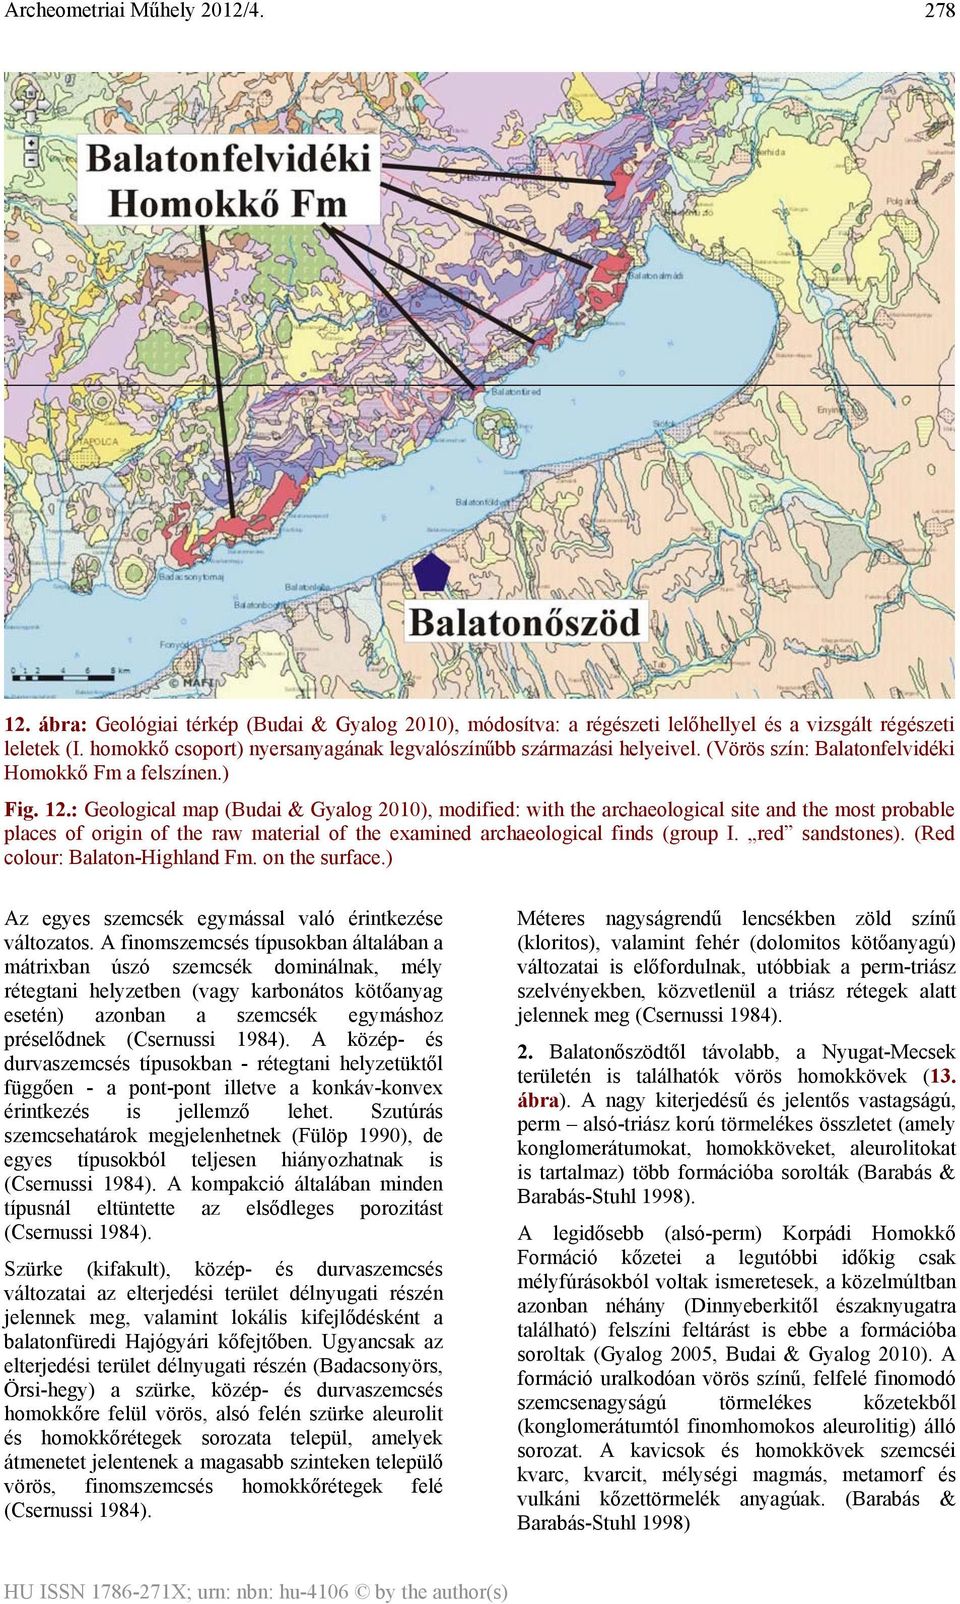 : Geological map (Budai & Gyalog 2010), modified: with the archaeological site and the most probable places of origin of the raw material of the examined archaeological finds (group I.